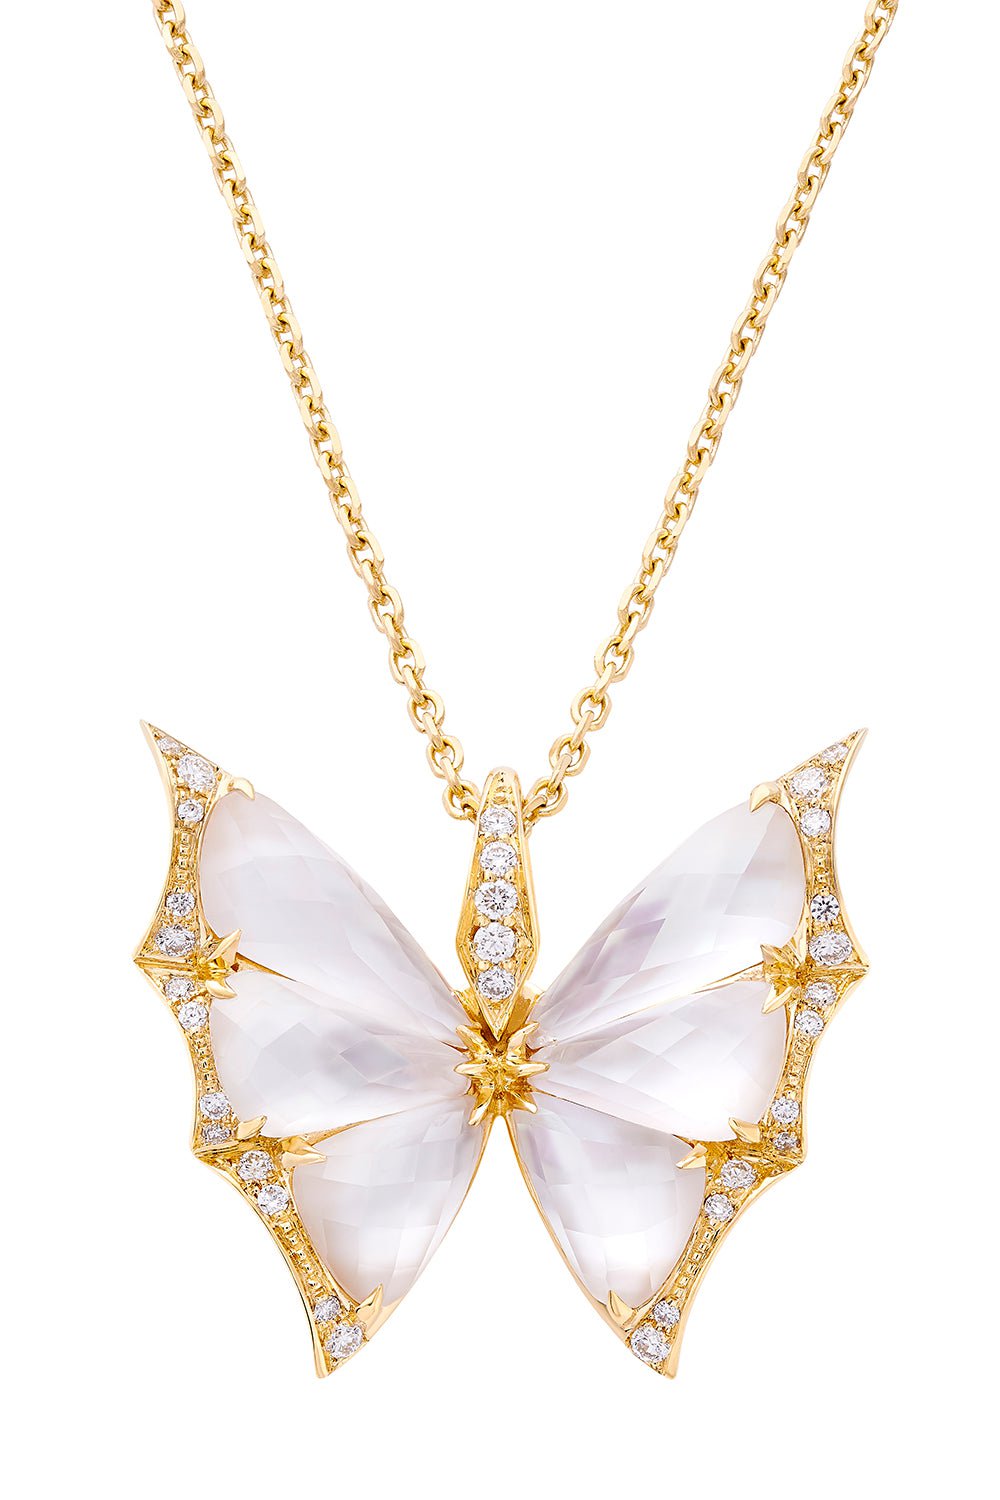 STEPHEN WEBSTER-Fly By Night Pendant Necklace-YELLOW GOLD